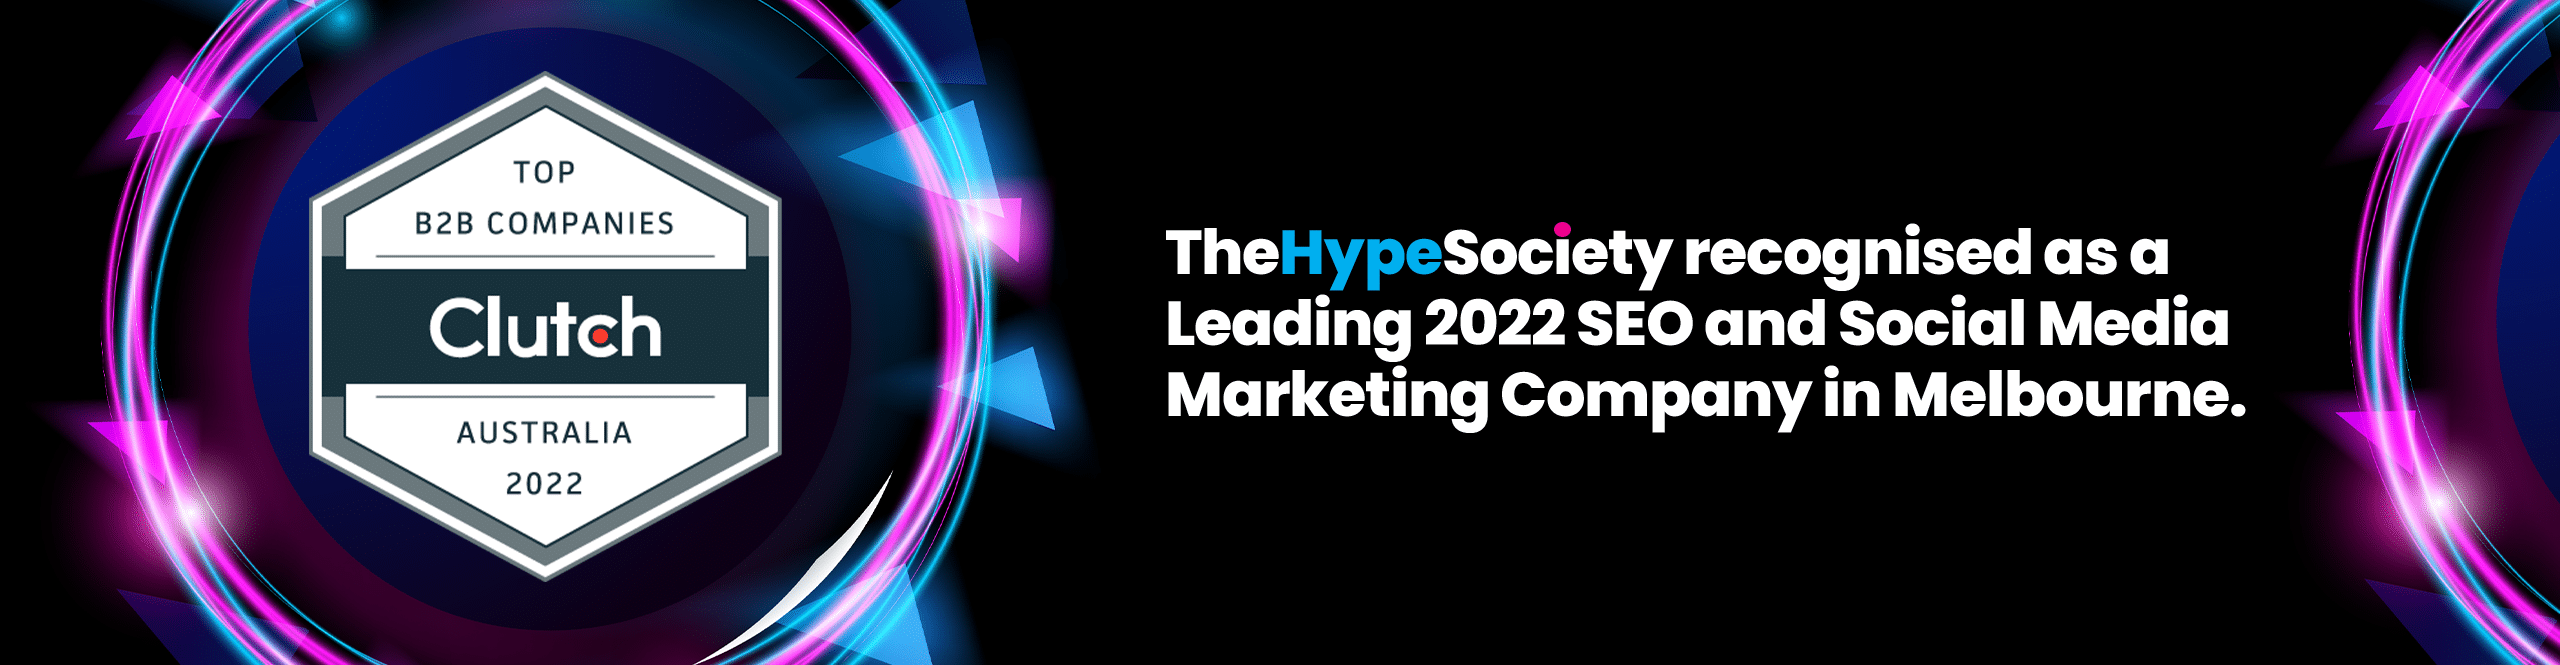 TheHypeSociety Leads the Way for SEO in 2022